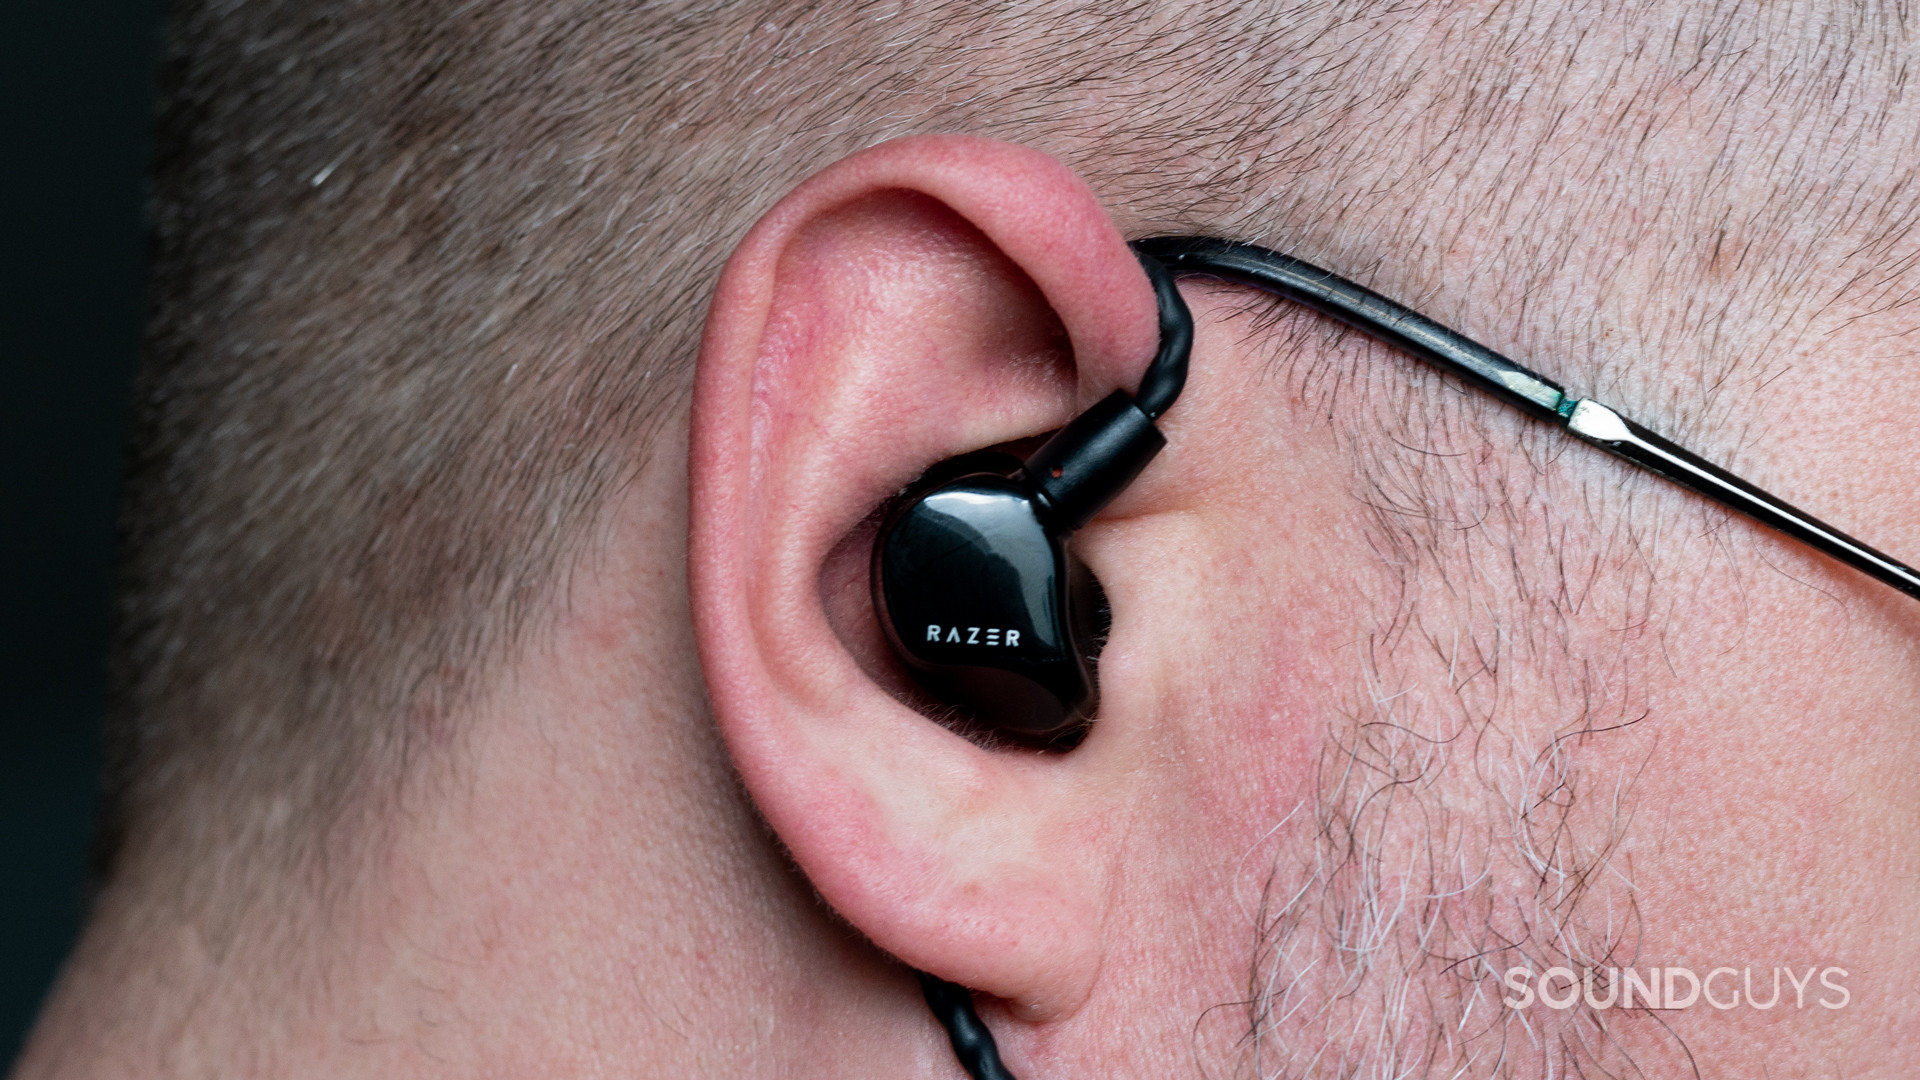 The Razer Moray IEM being used by a short-haired, bespectacled man.